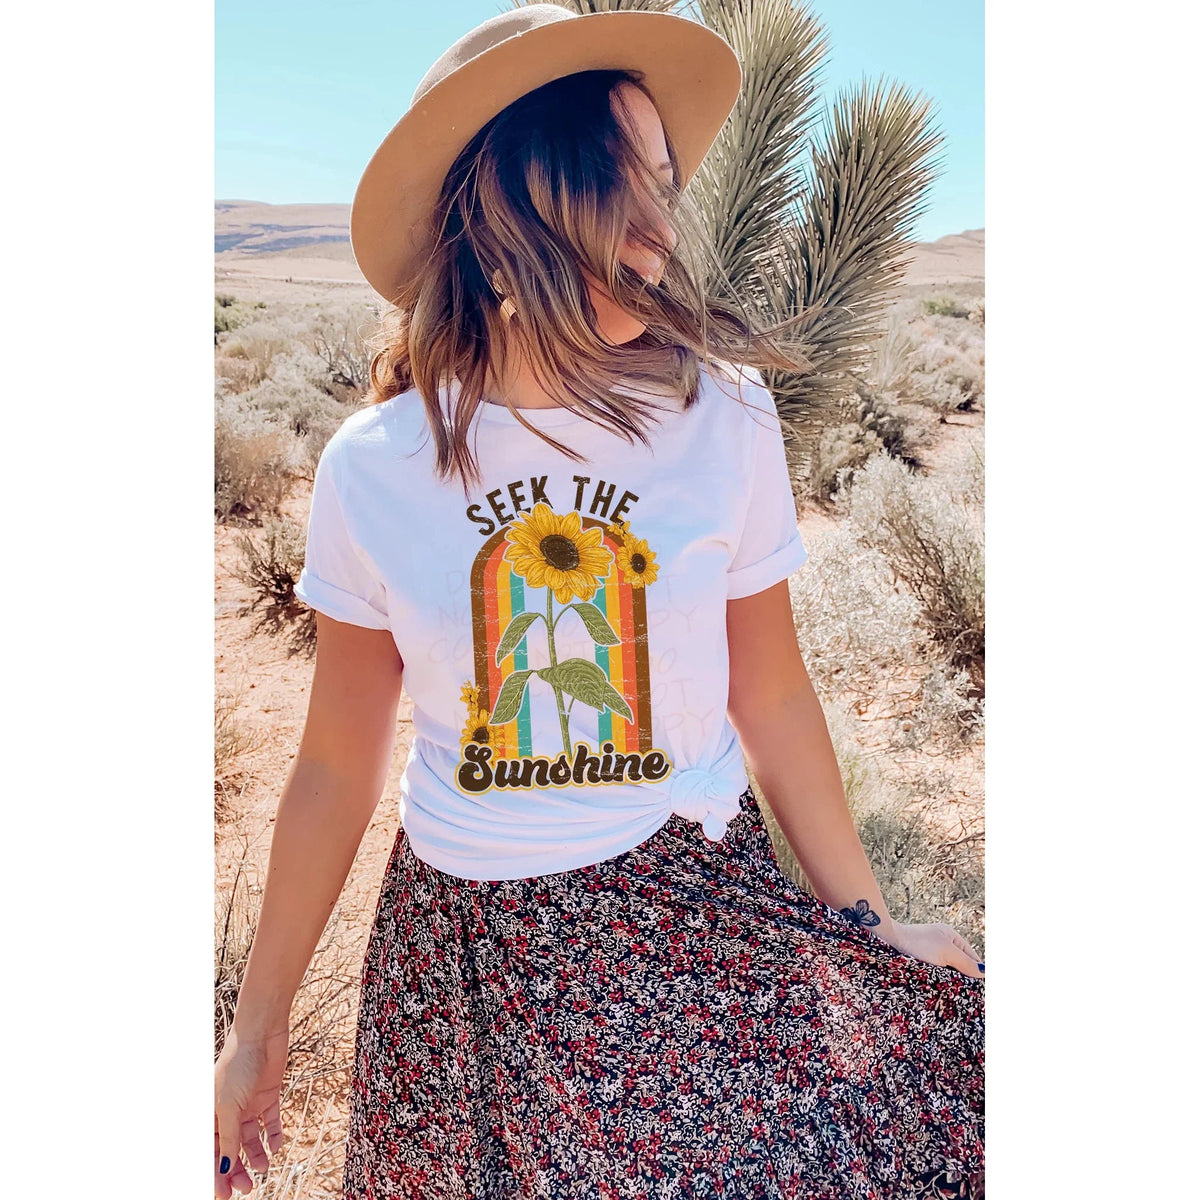 Seek the Sunshine GRAPHIC TEE ALLOW 7 DAYS TO SHIP + SHIP TIME